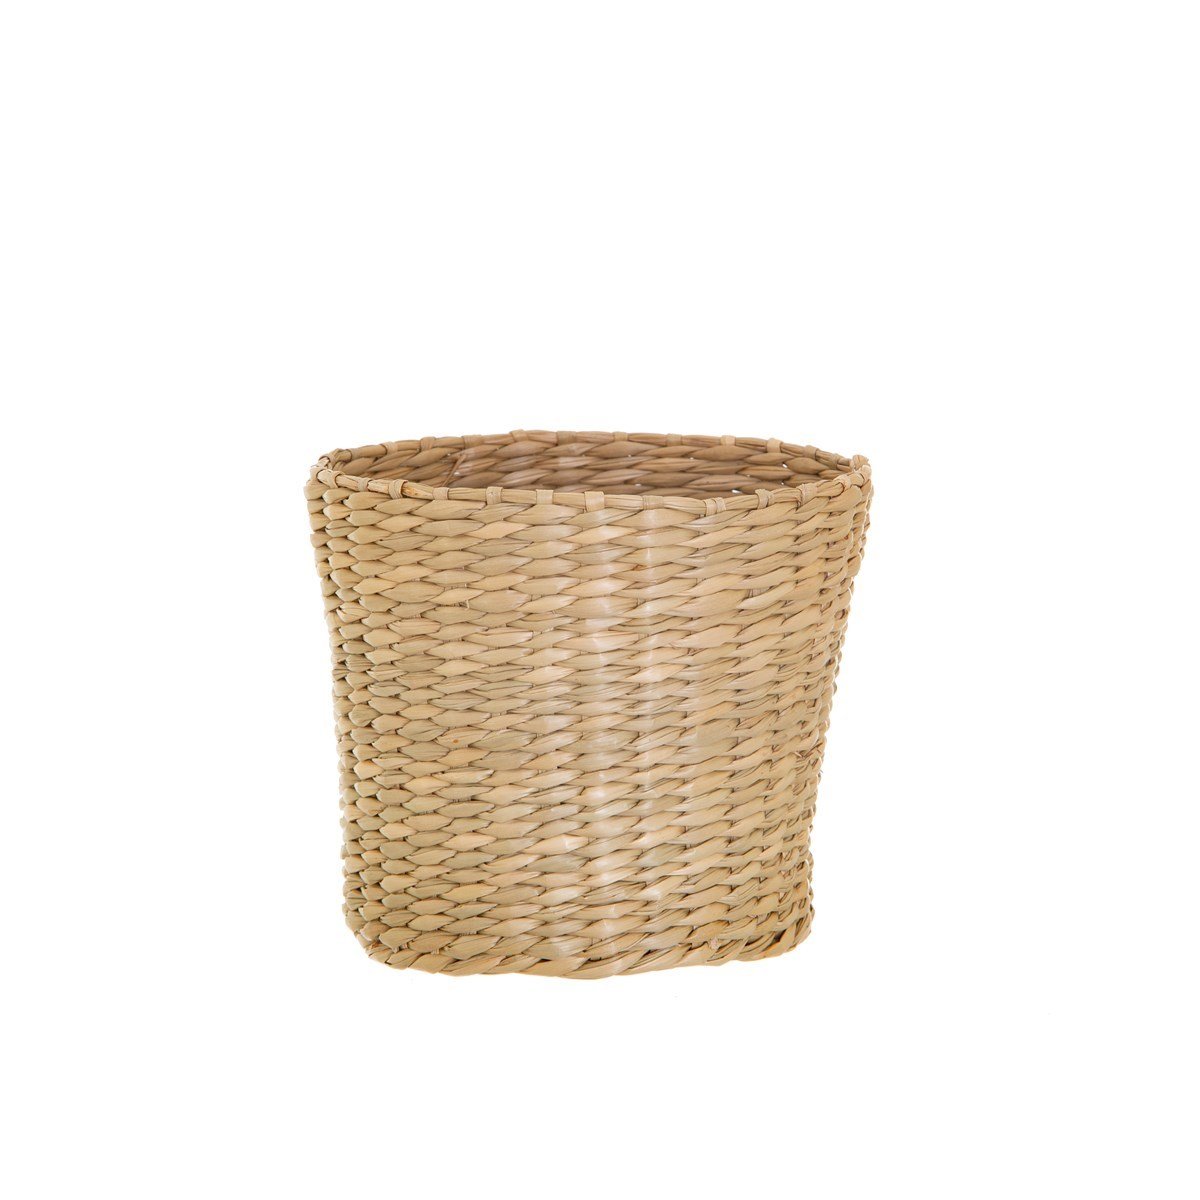 Small Woven Seagrass Planter - a Cheeky Plant